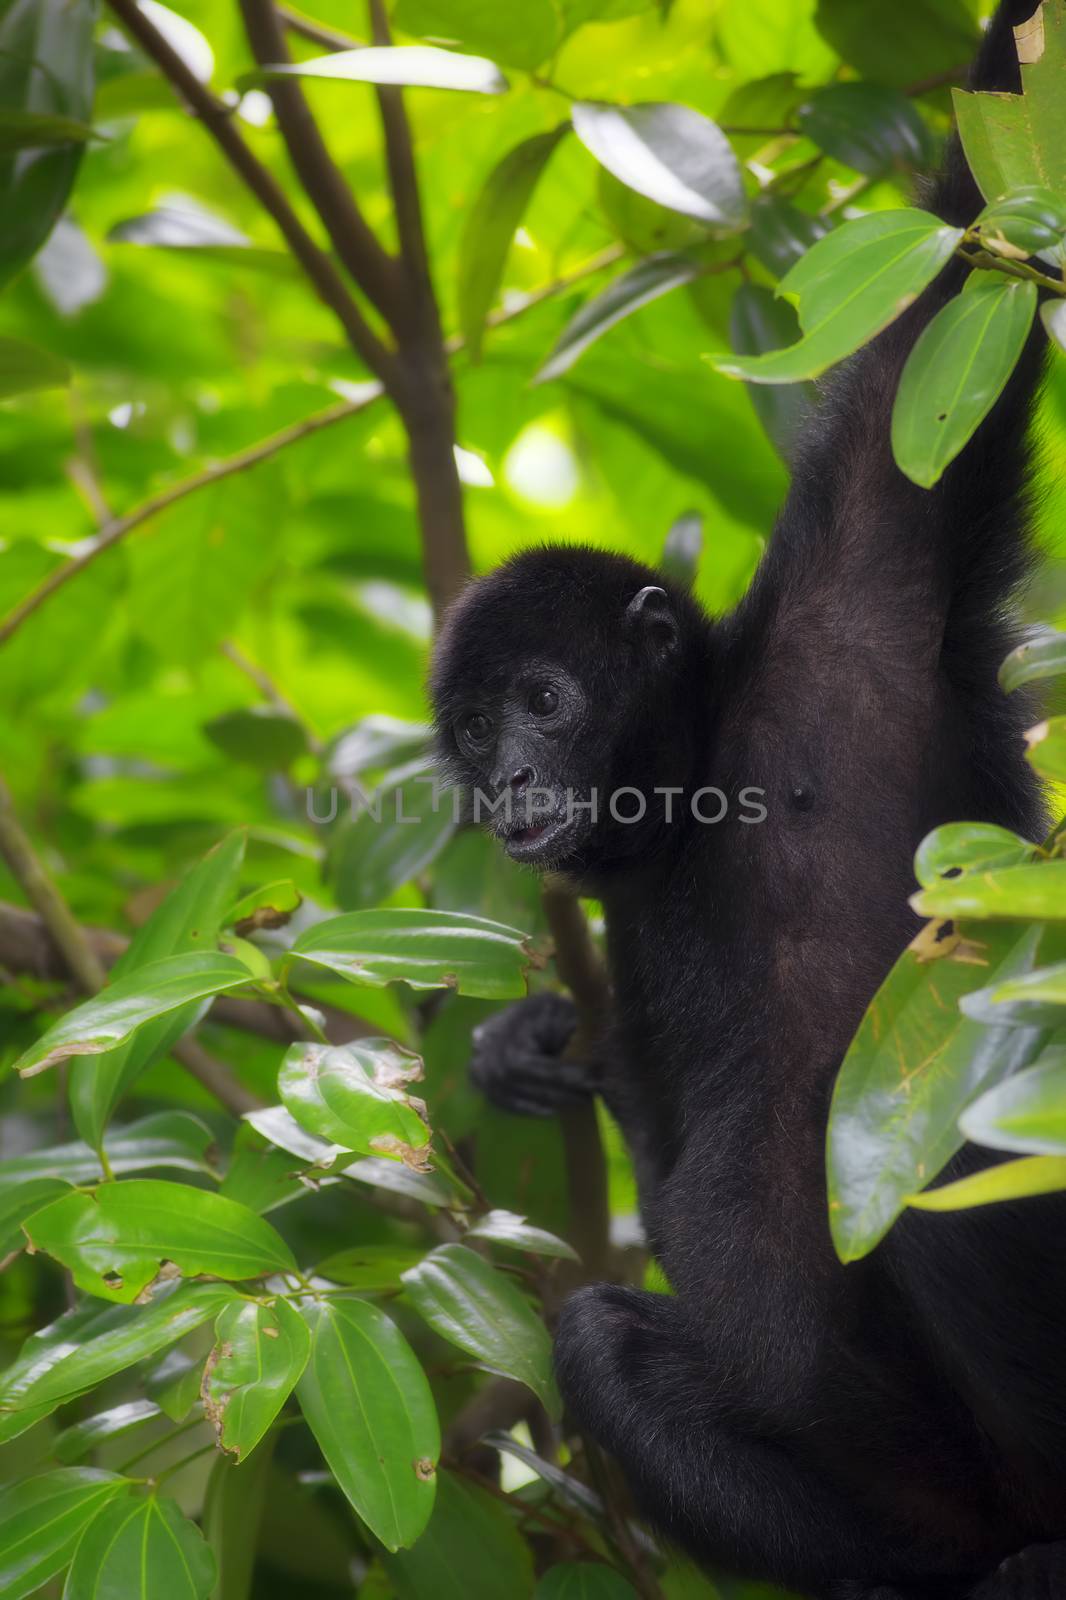 Spider Monkey in the green jungle of Costa Rica